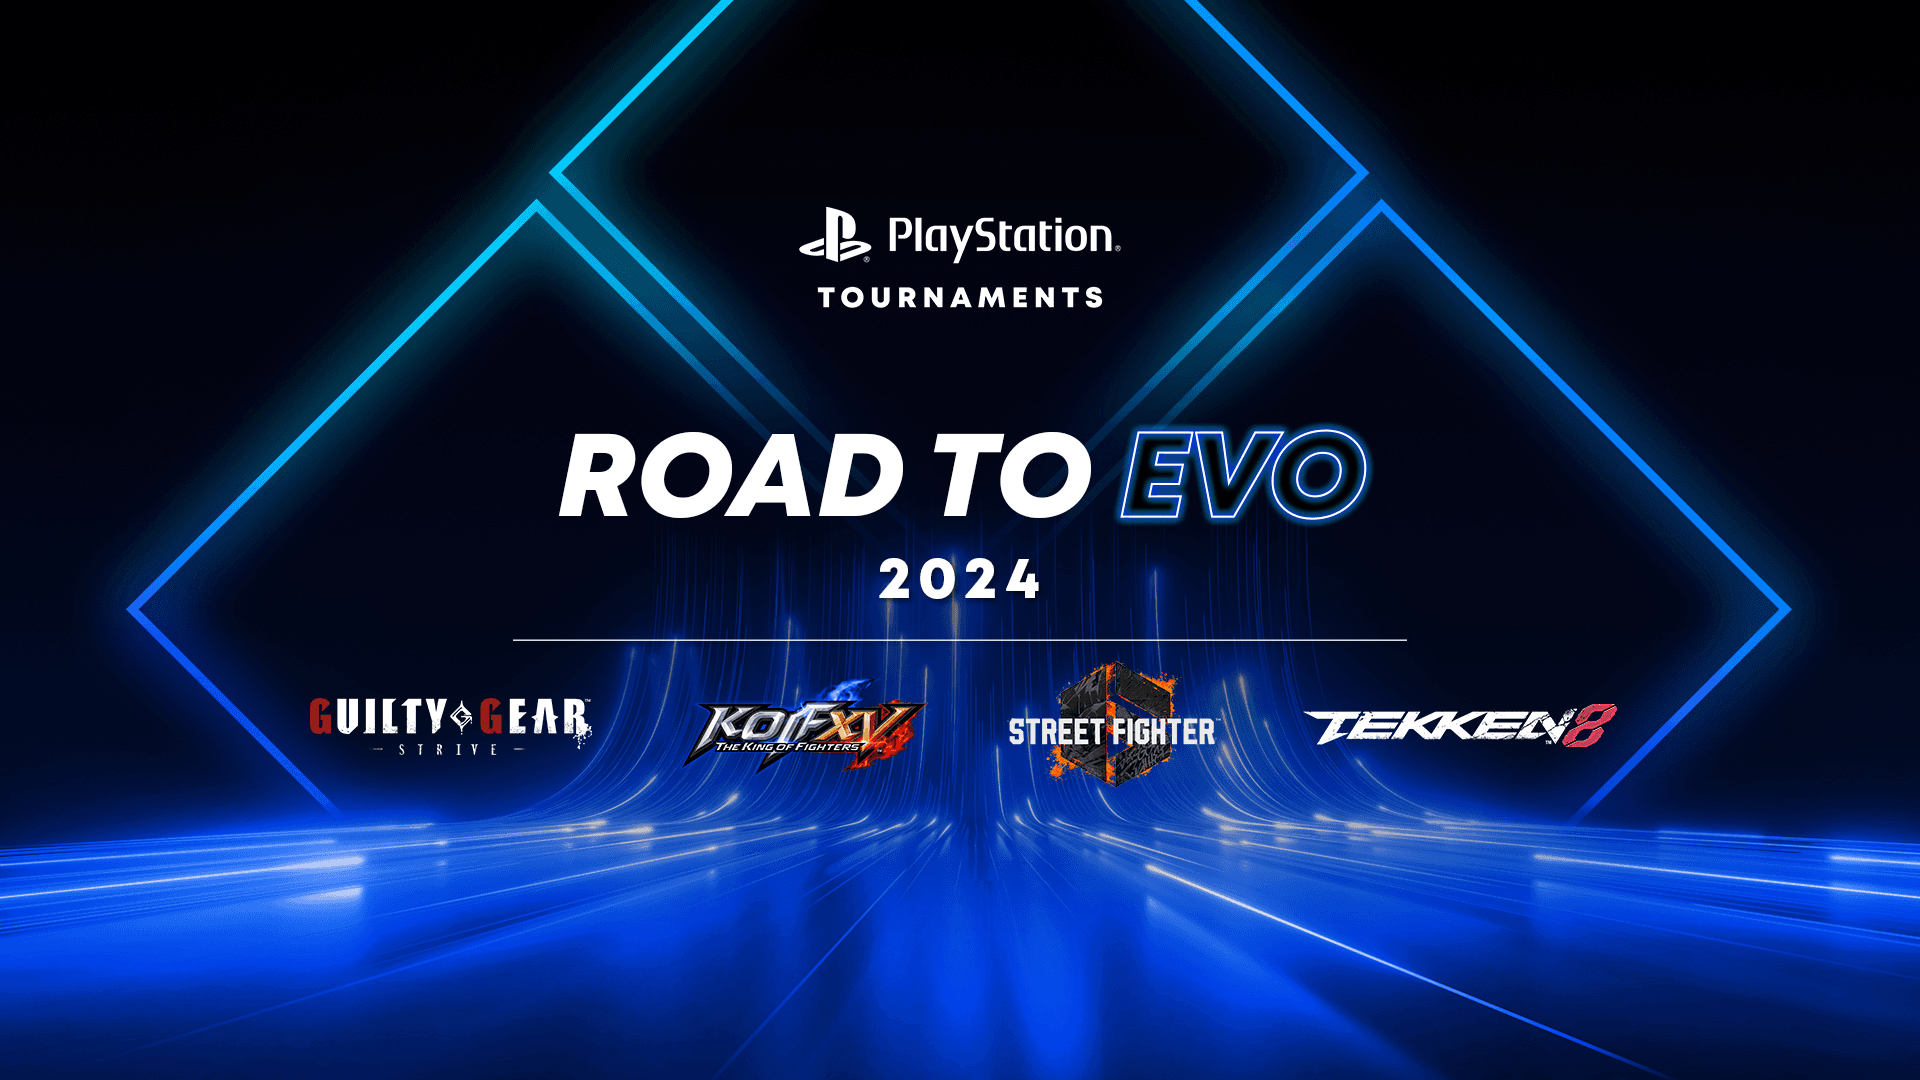 Road to Evo 2024 feature image